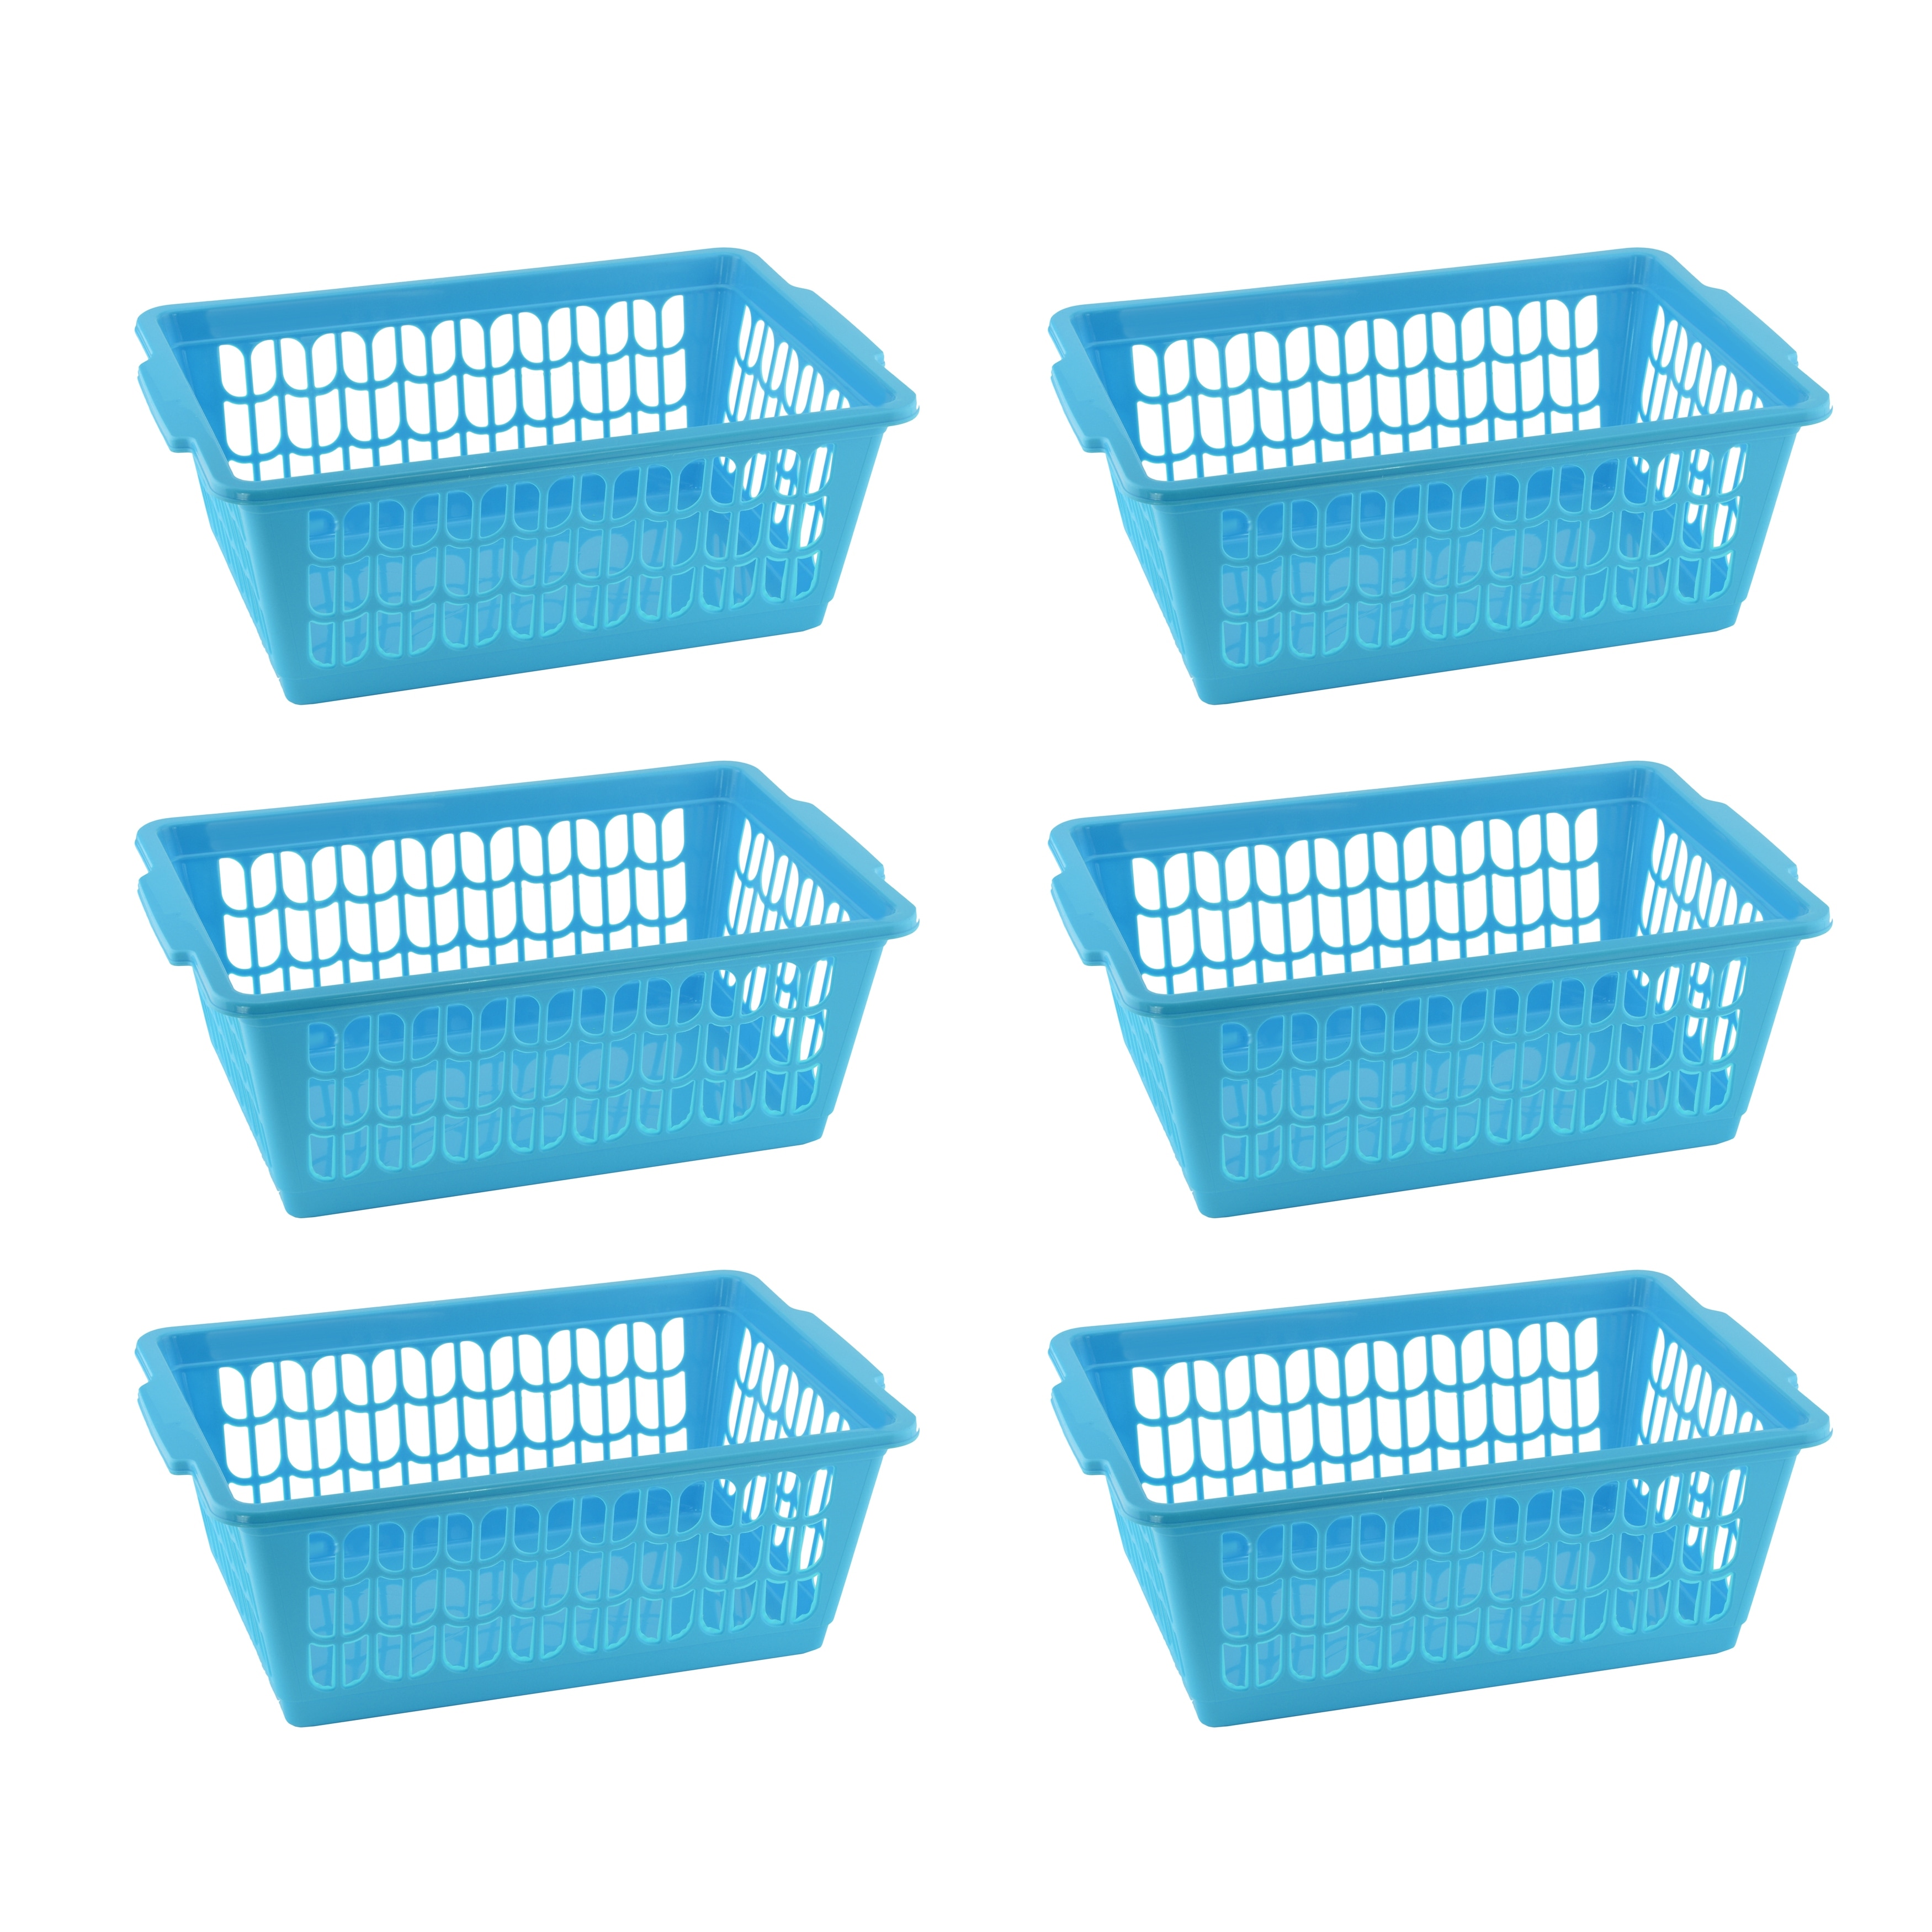 https://ak1.ostkcdn.com/images/products/is/images/direct/325712e83a143cd4da4d7b16e32bdc7942e6351e/Small-Plastic-Storage-Basket-for-Organizing-Kitchen-Pantry%2C-Countertop.jpg